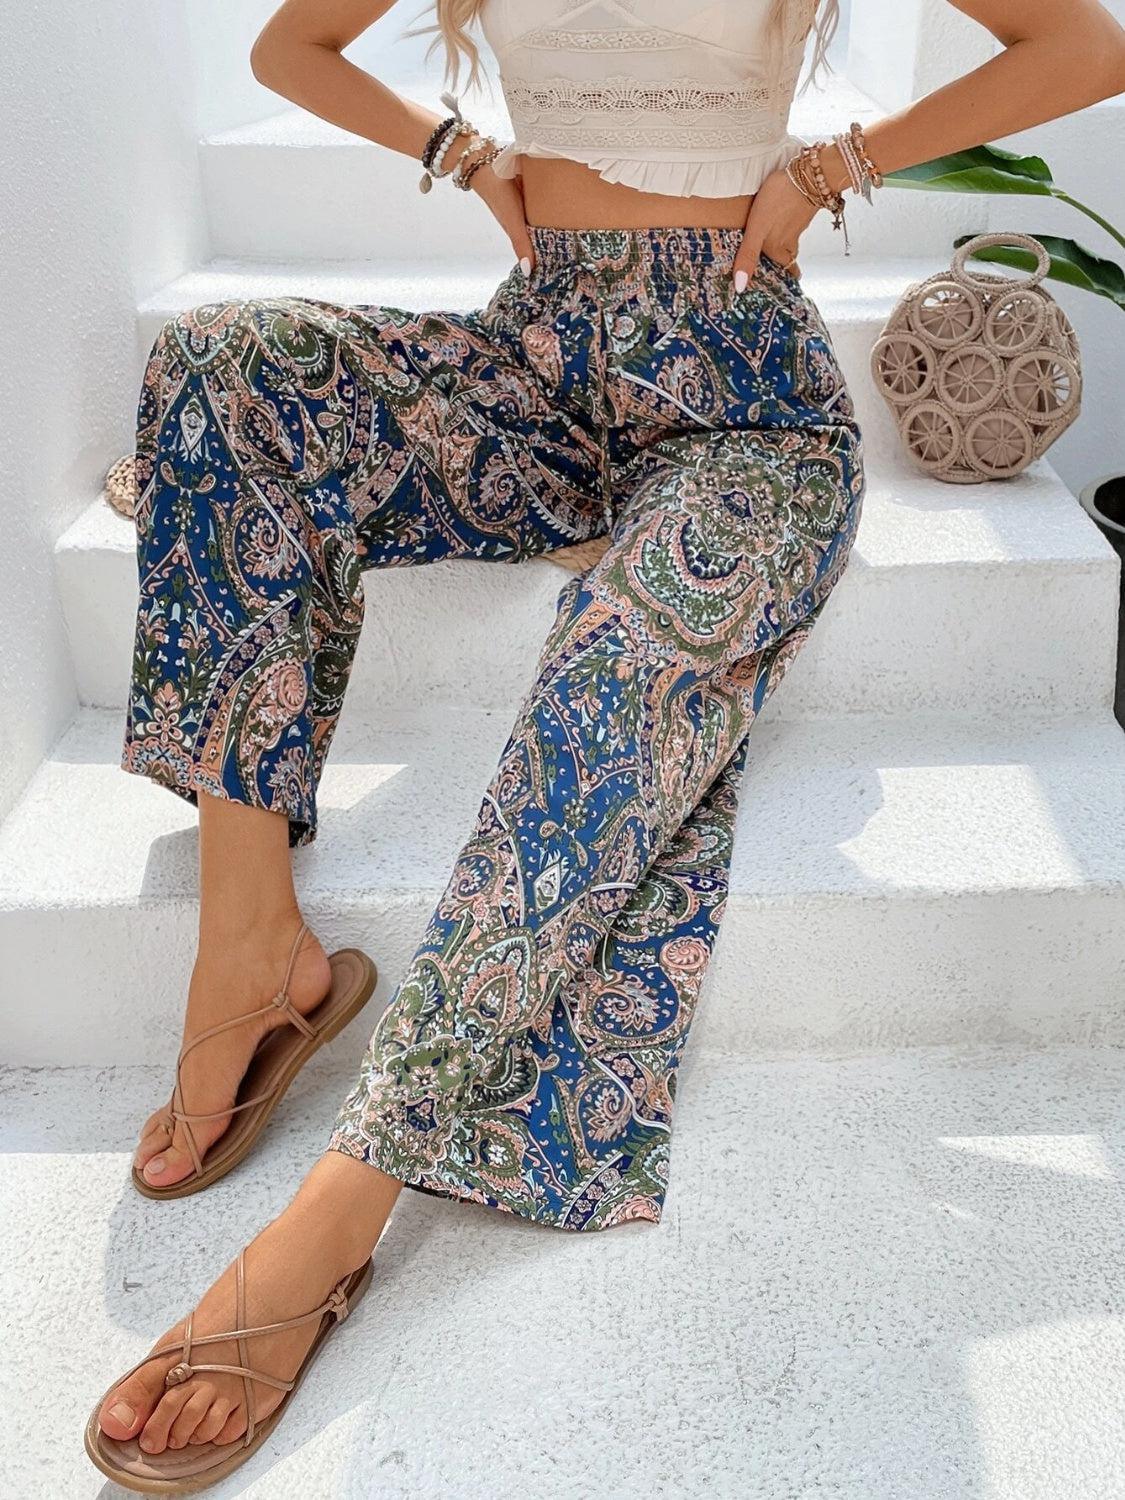 a woman sitting on a step wearing a white top and paisley print pants